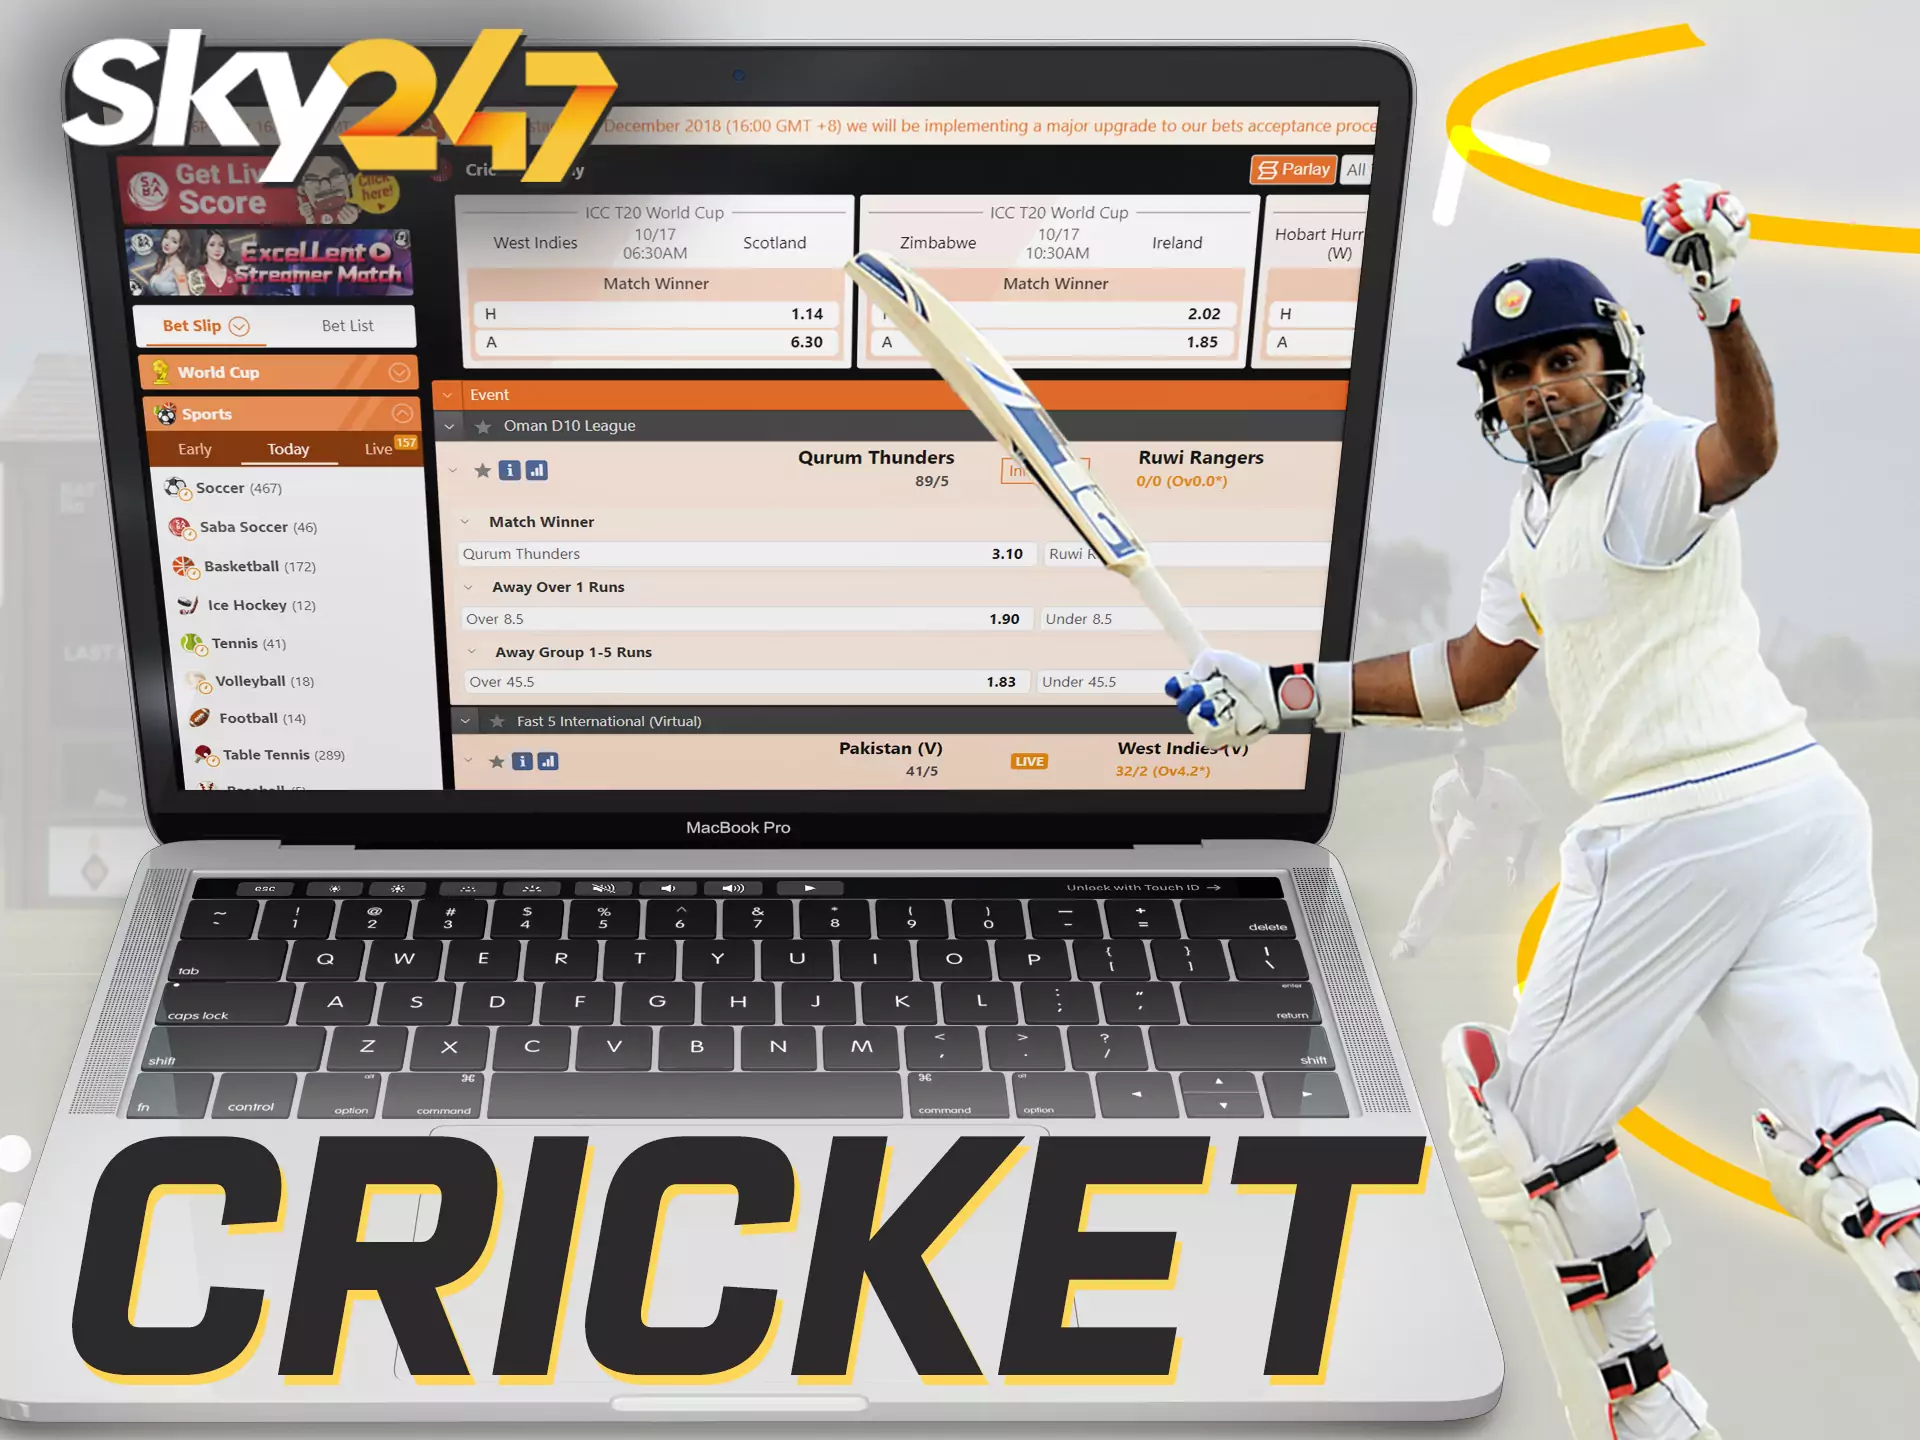 Cricket betting is widely popular on the Sky247 website.